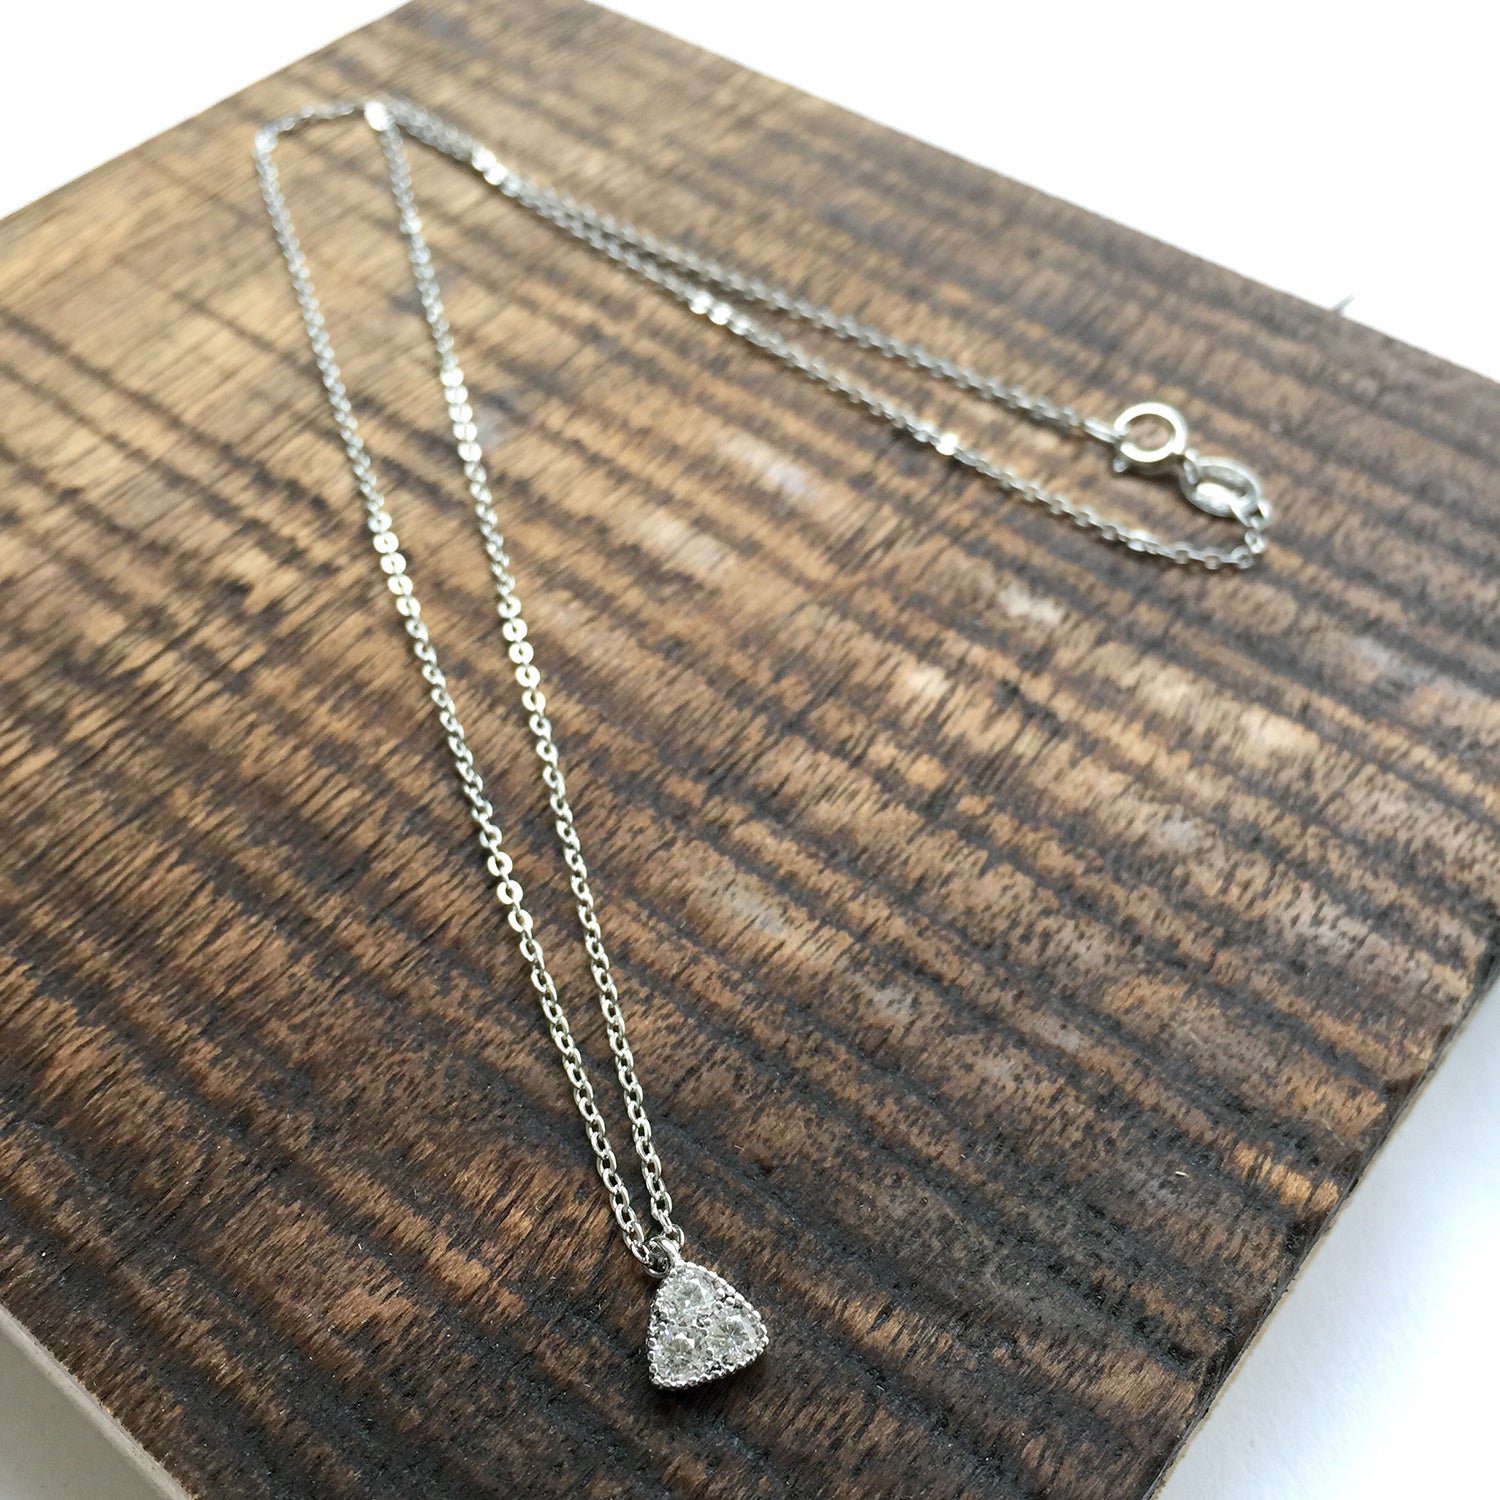 Sterling Silver Triangle Necklace with Crystal, Dainty Delicate Necklace, Sterling Silver Necklace